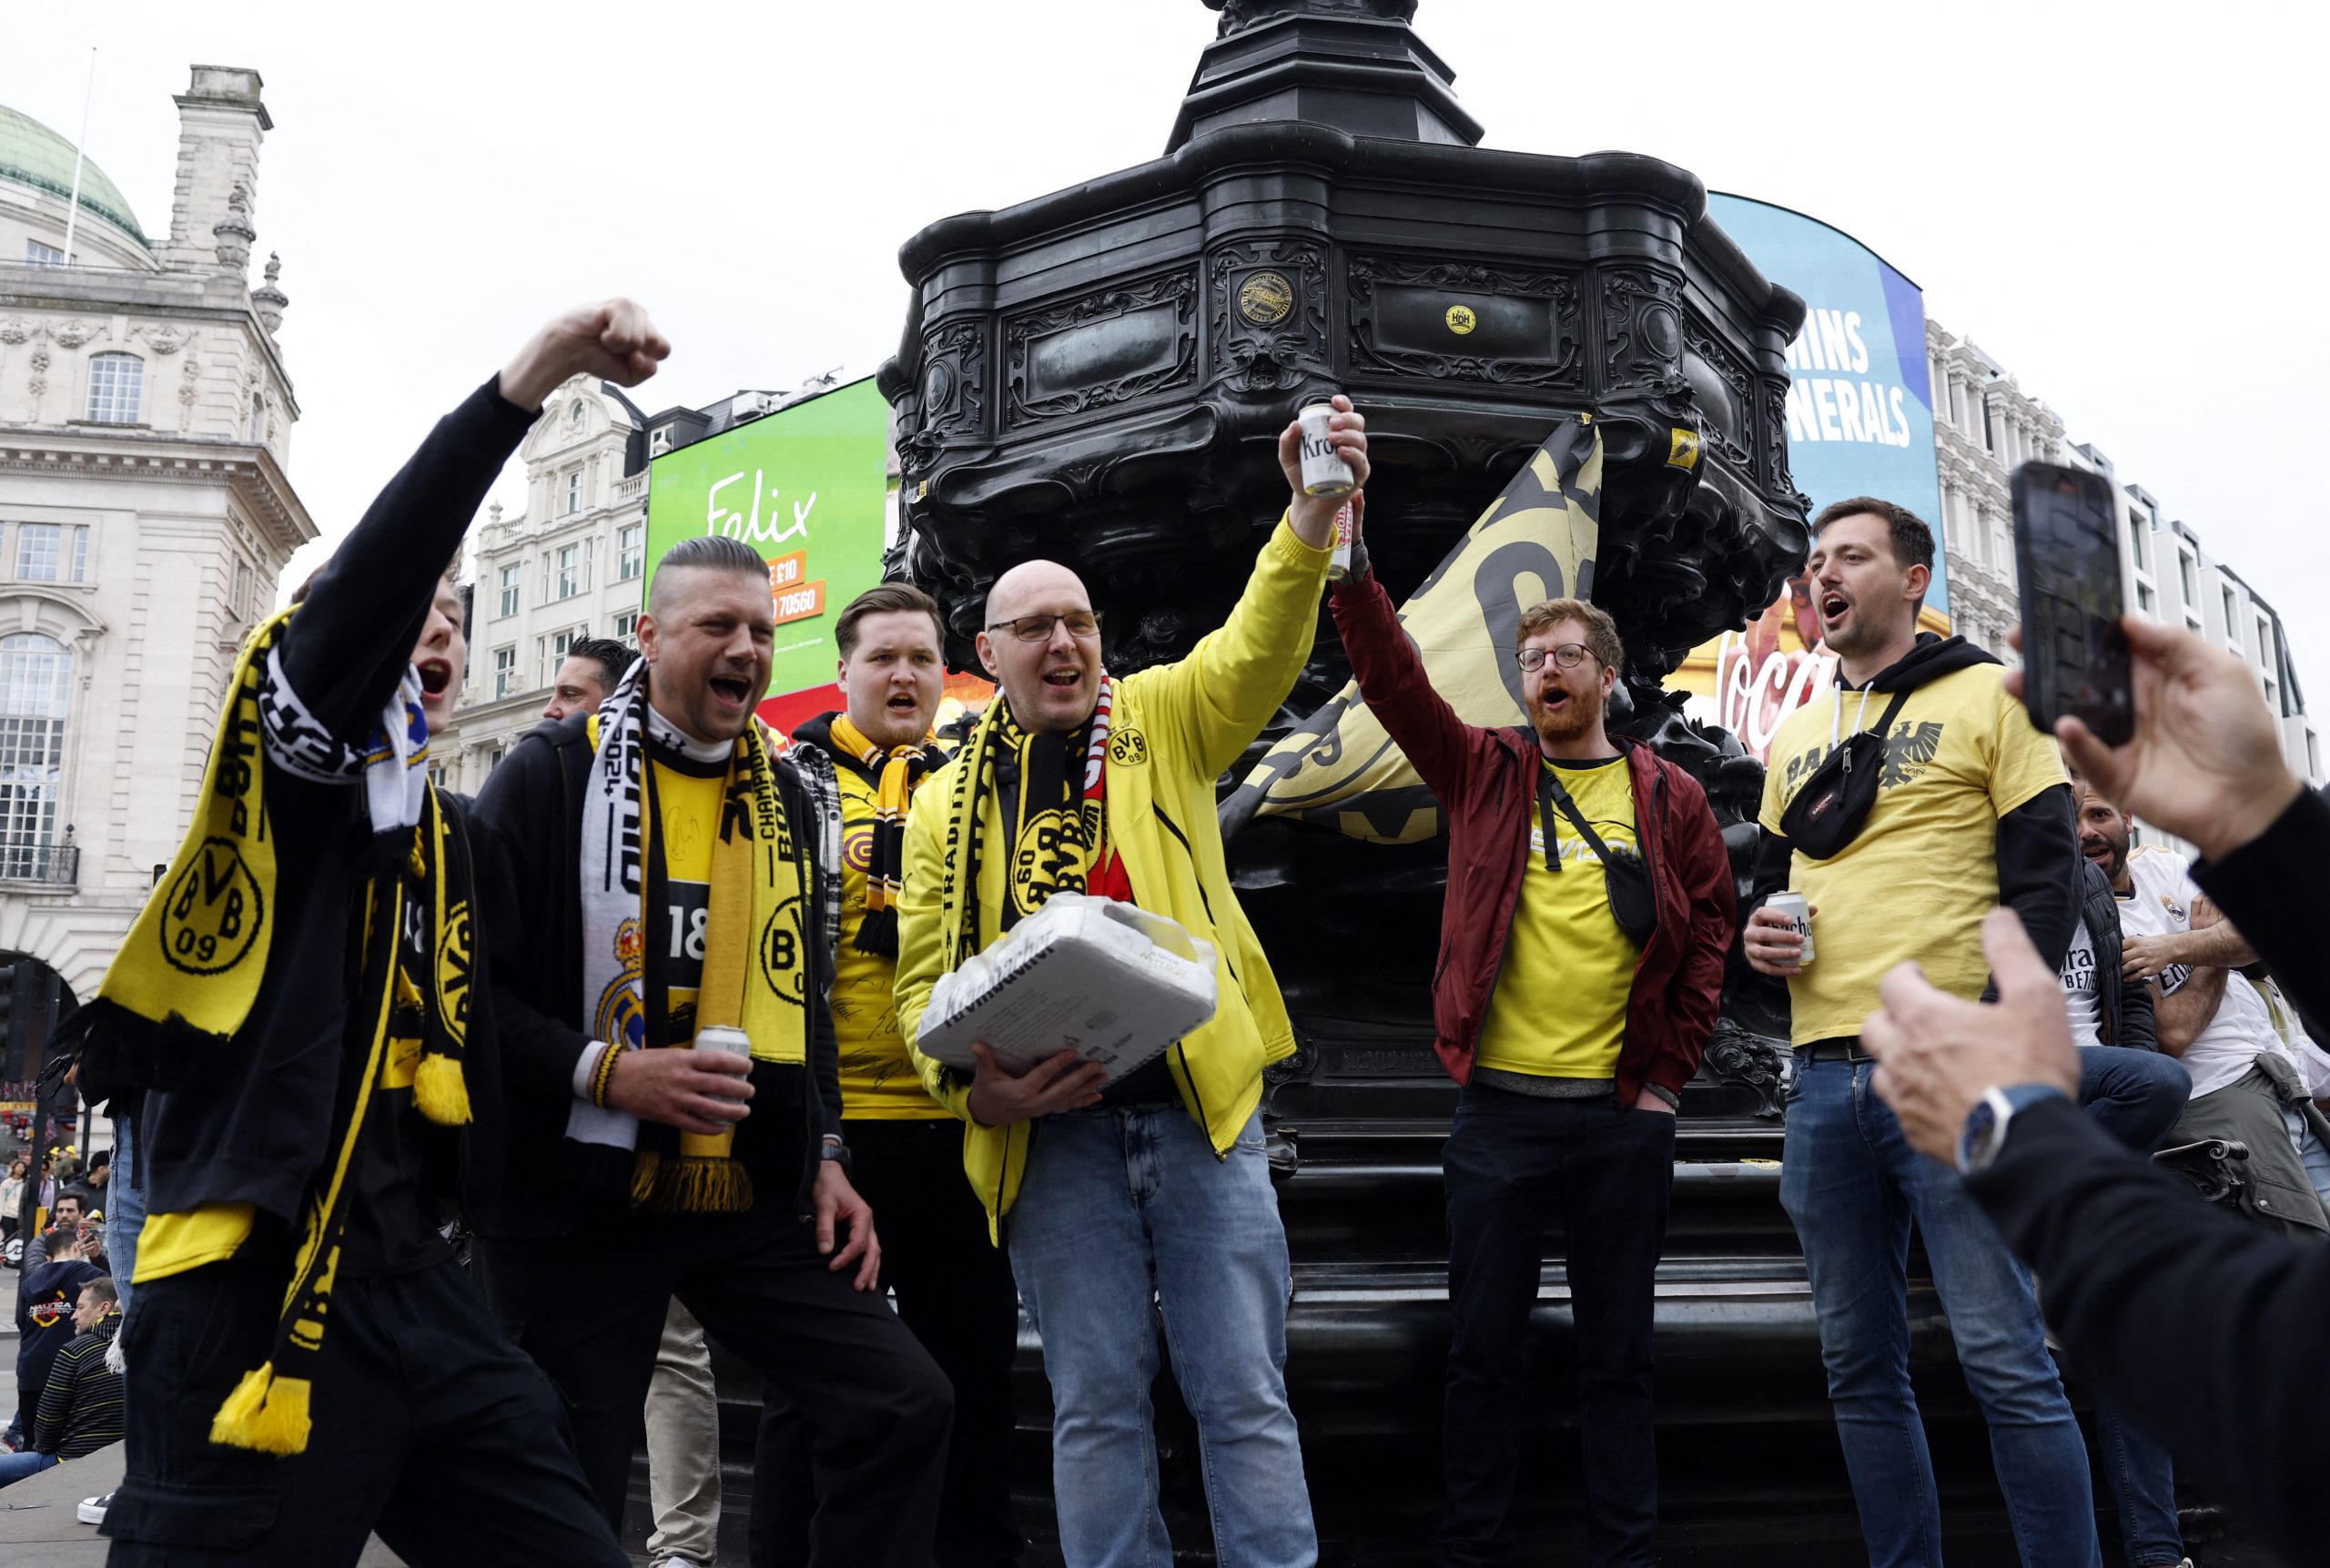 Dortmund and Real Madrid fans take over London as they get on the beers ahead of Champions League final at Wembley